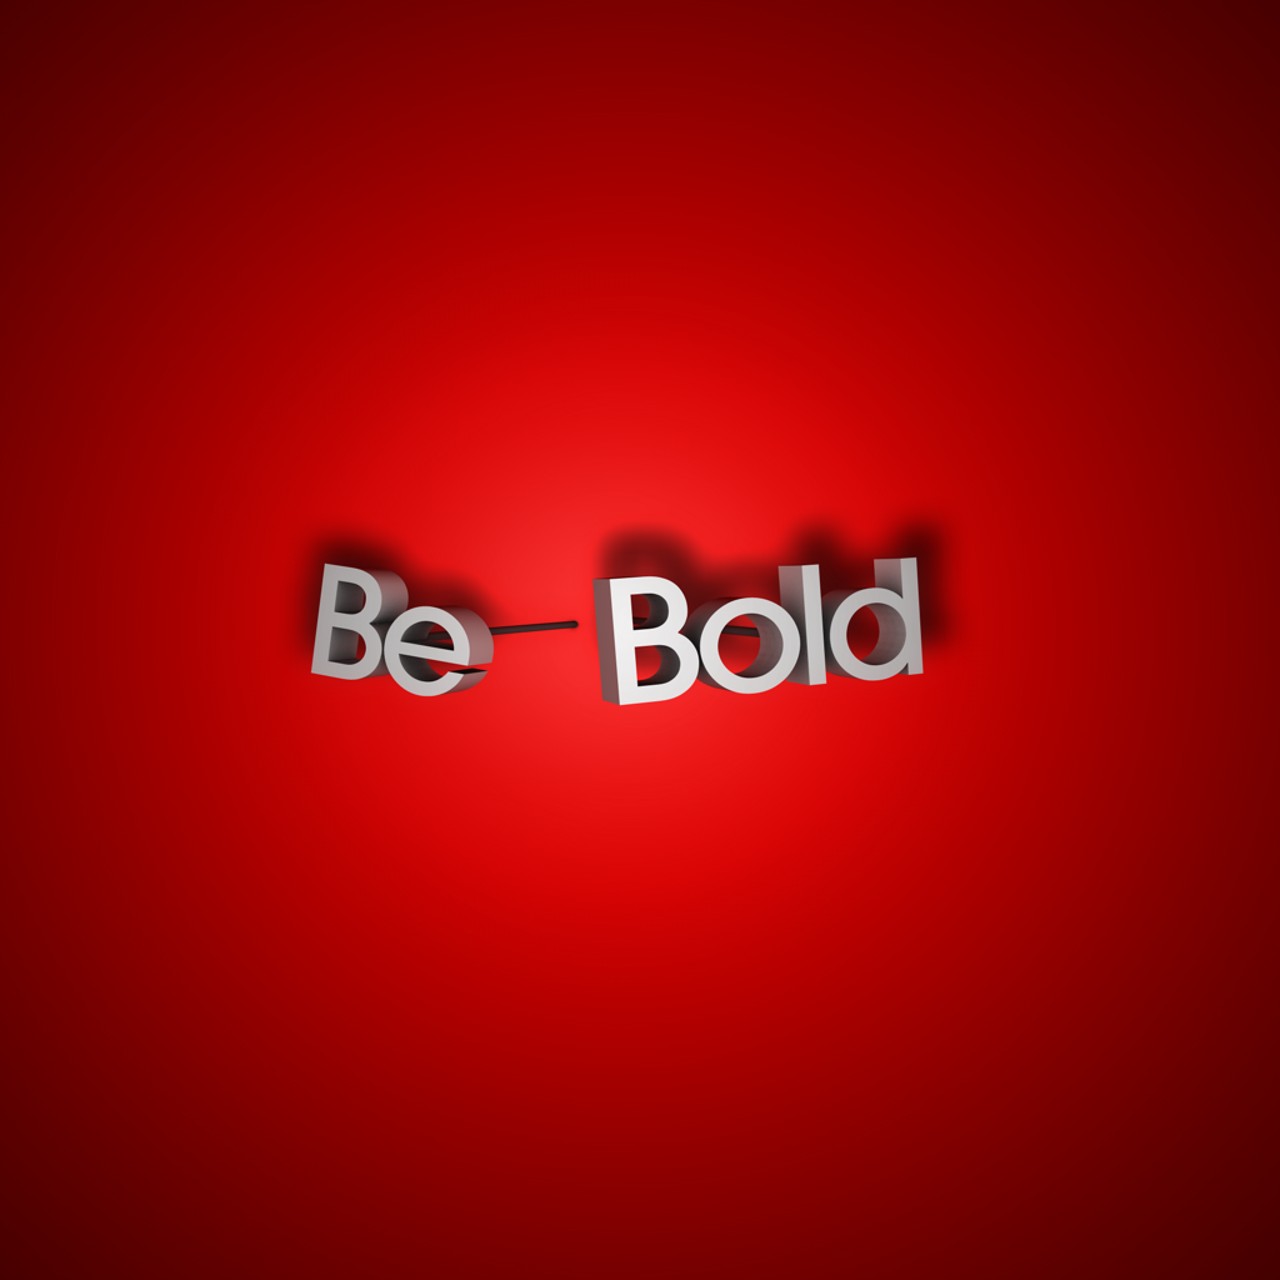  download Be Bold 3D Text BlackBerry Red Background Rojo 1280x1280